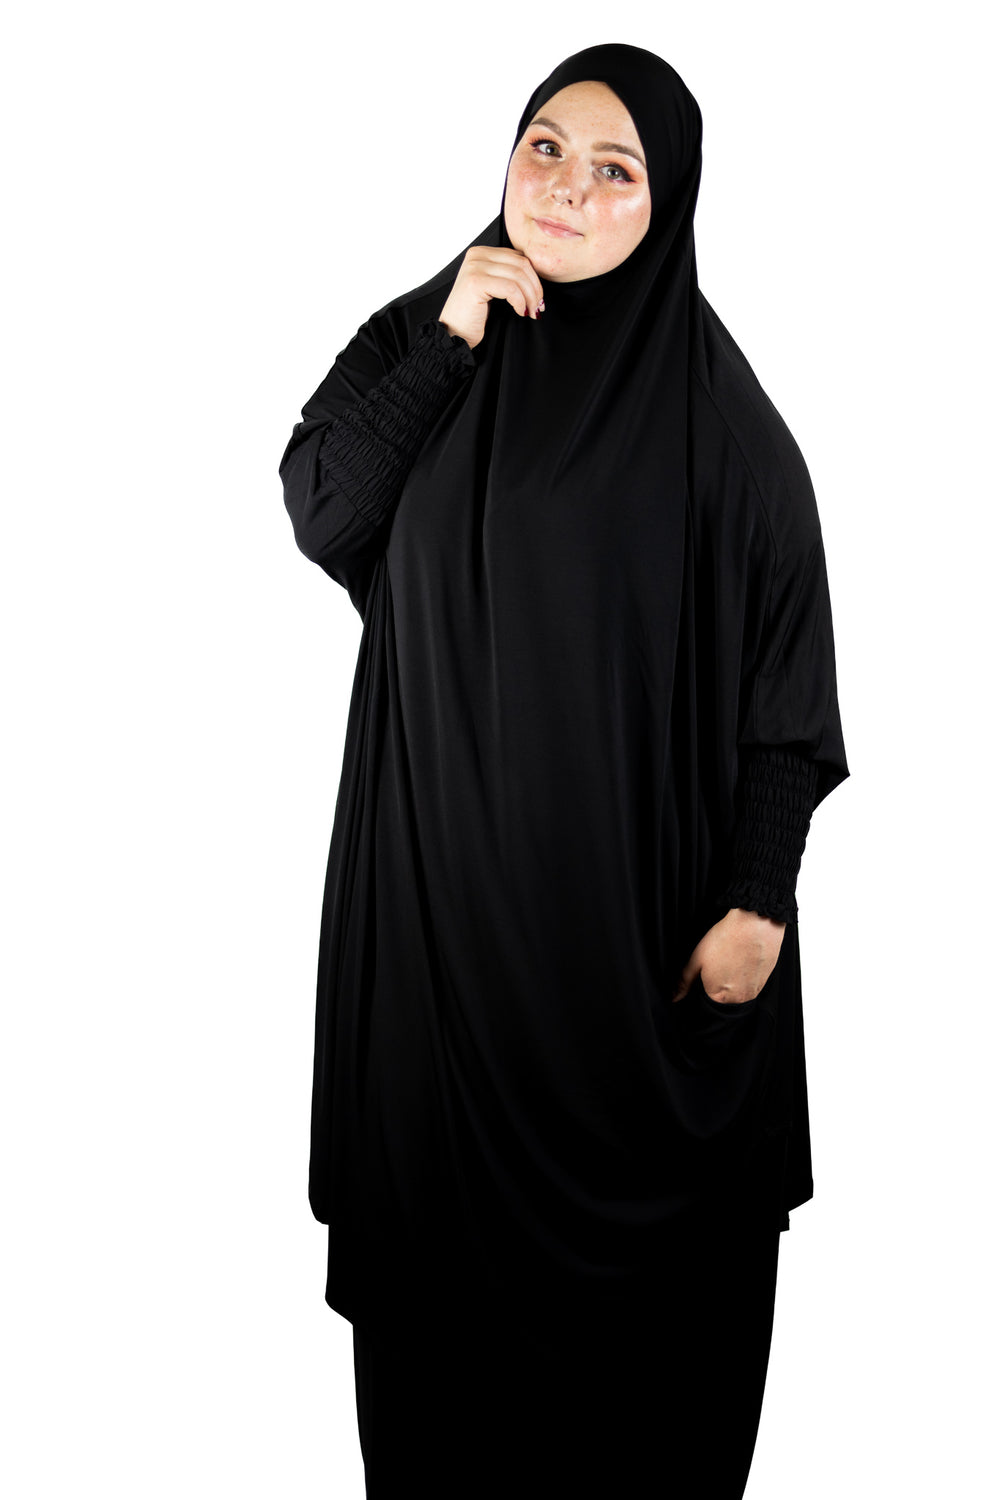 black stretchy two piece jilbab prayer set with adjustable hijab with tie and pockets and scrunched up sleeves and skirt